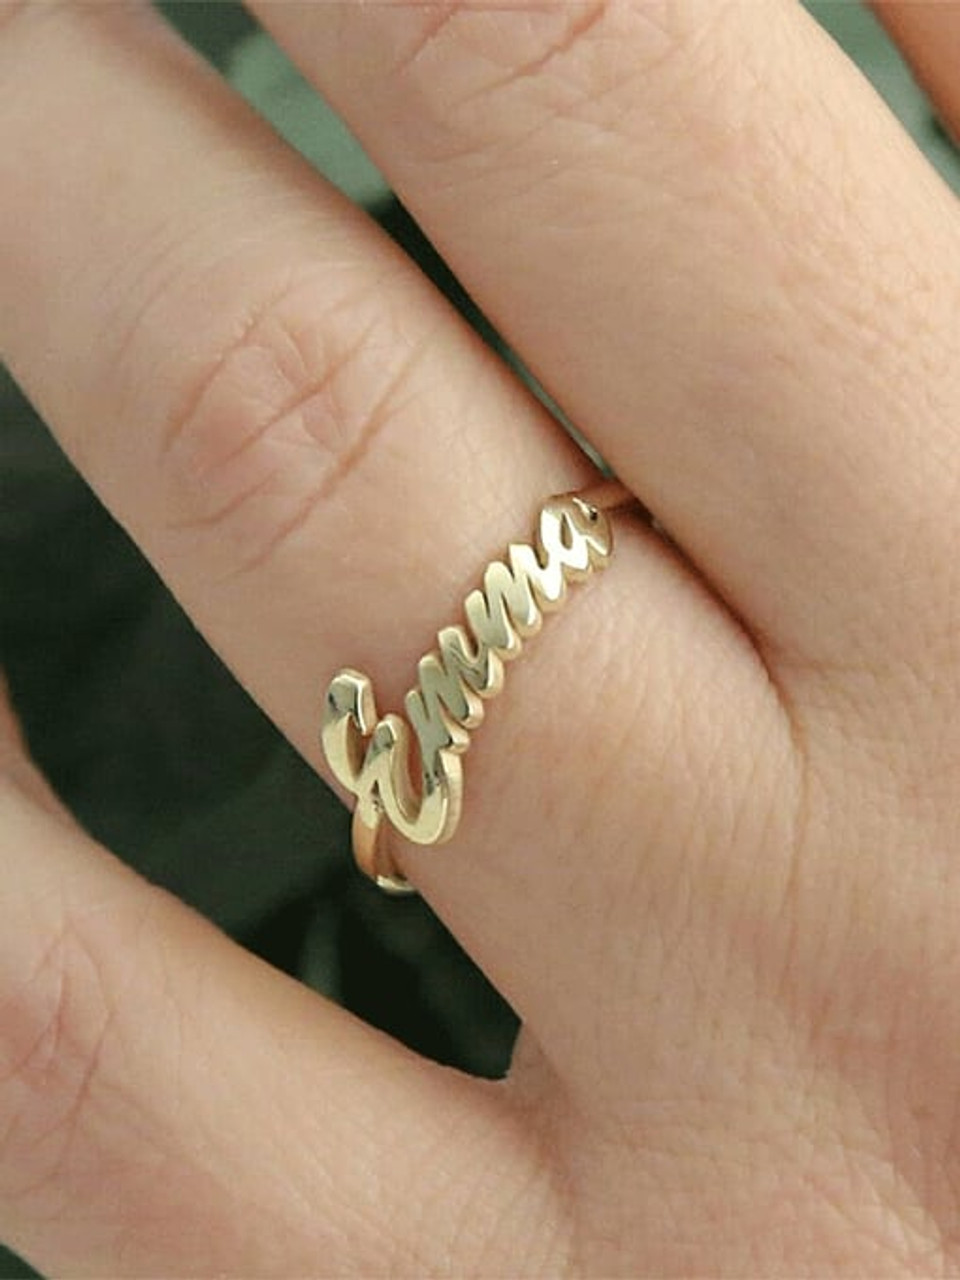 14k Solid Gold Name Ring With Natural Diamond, Personalized Name Jewelry  Gifts for Mom Daughter Grandmother, Holiday Stocking Stuffers - Etsy